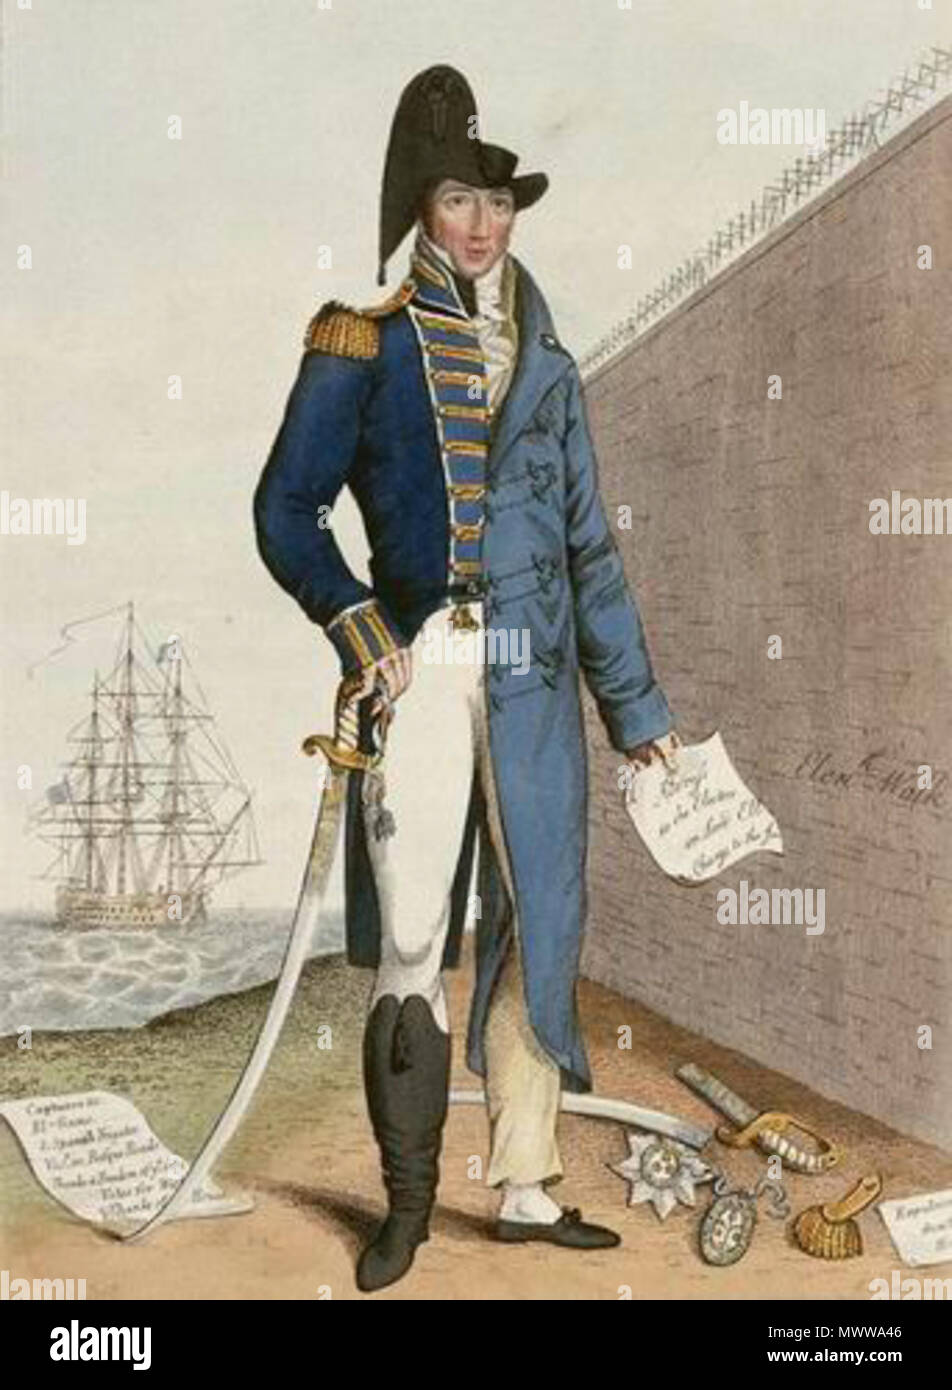 . English: Things as they have been. Things as they now are. Caricature of Lord Cochrane made shortly after his conviction for fraud in 1814. The left side of the image depicts Cochrane as a heroic naval officer. He wears his Royal Navy uniform and on the floor beside him is a list of his notable battles. The right side depicts him as a disgraced civilian within the walls of the King's Bench Prison. His sword, epaulette and badge of the Order of the Bath lay broken and scattered on the floor. 8 May 1815. C Dyer (publisher) 135 Cochrane Stock Exchange Stock Photo